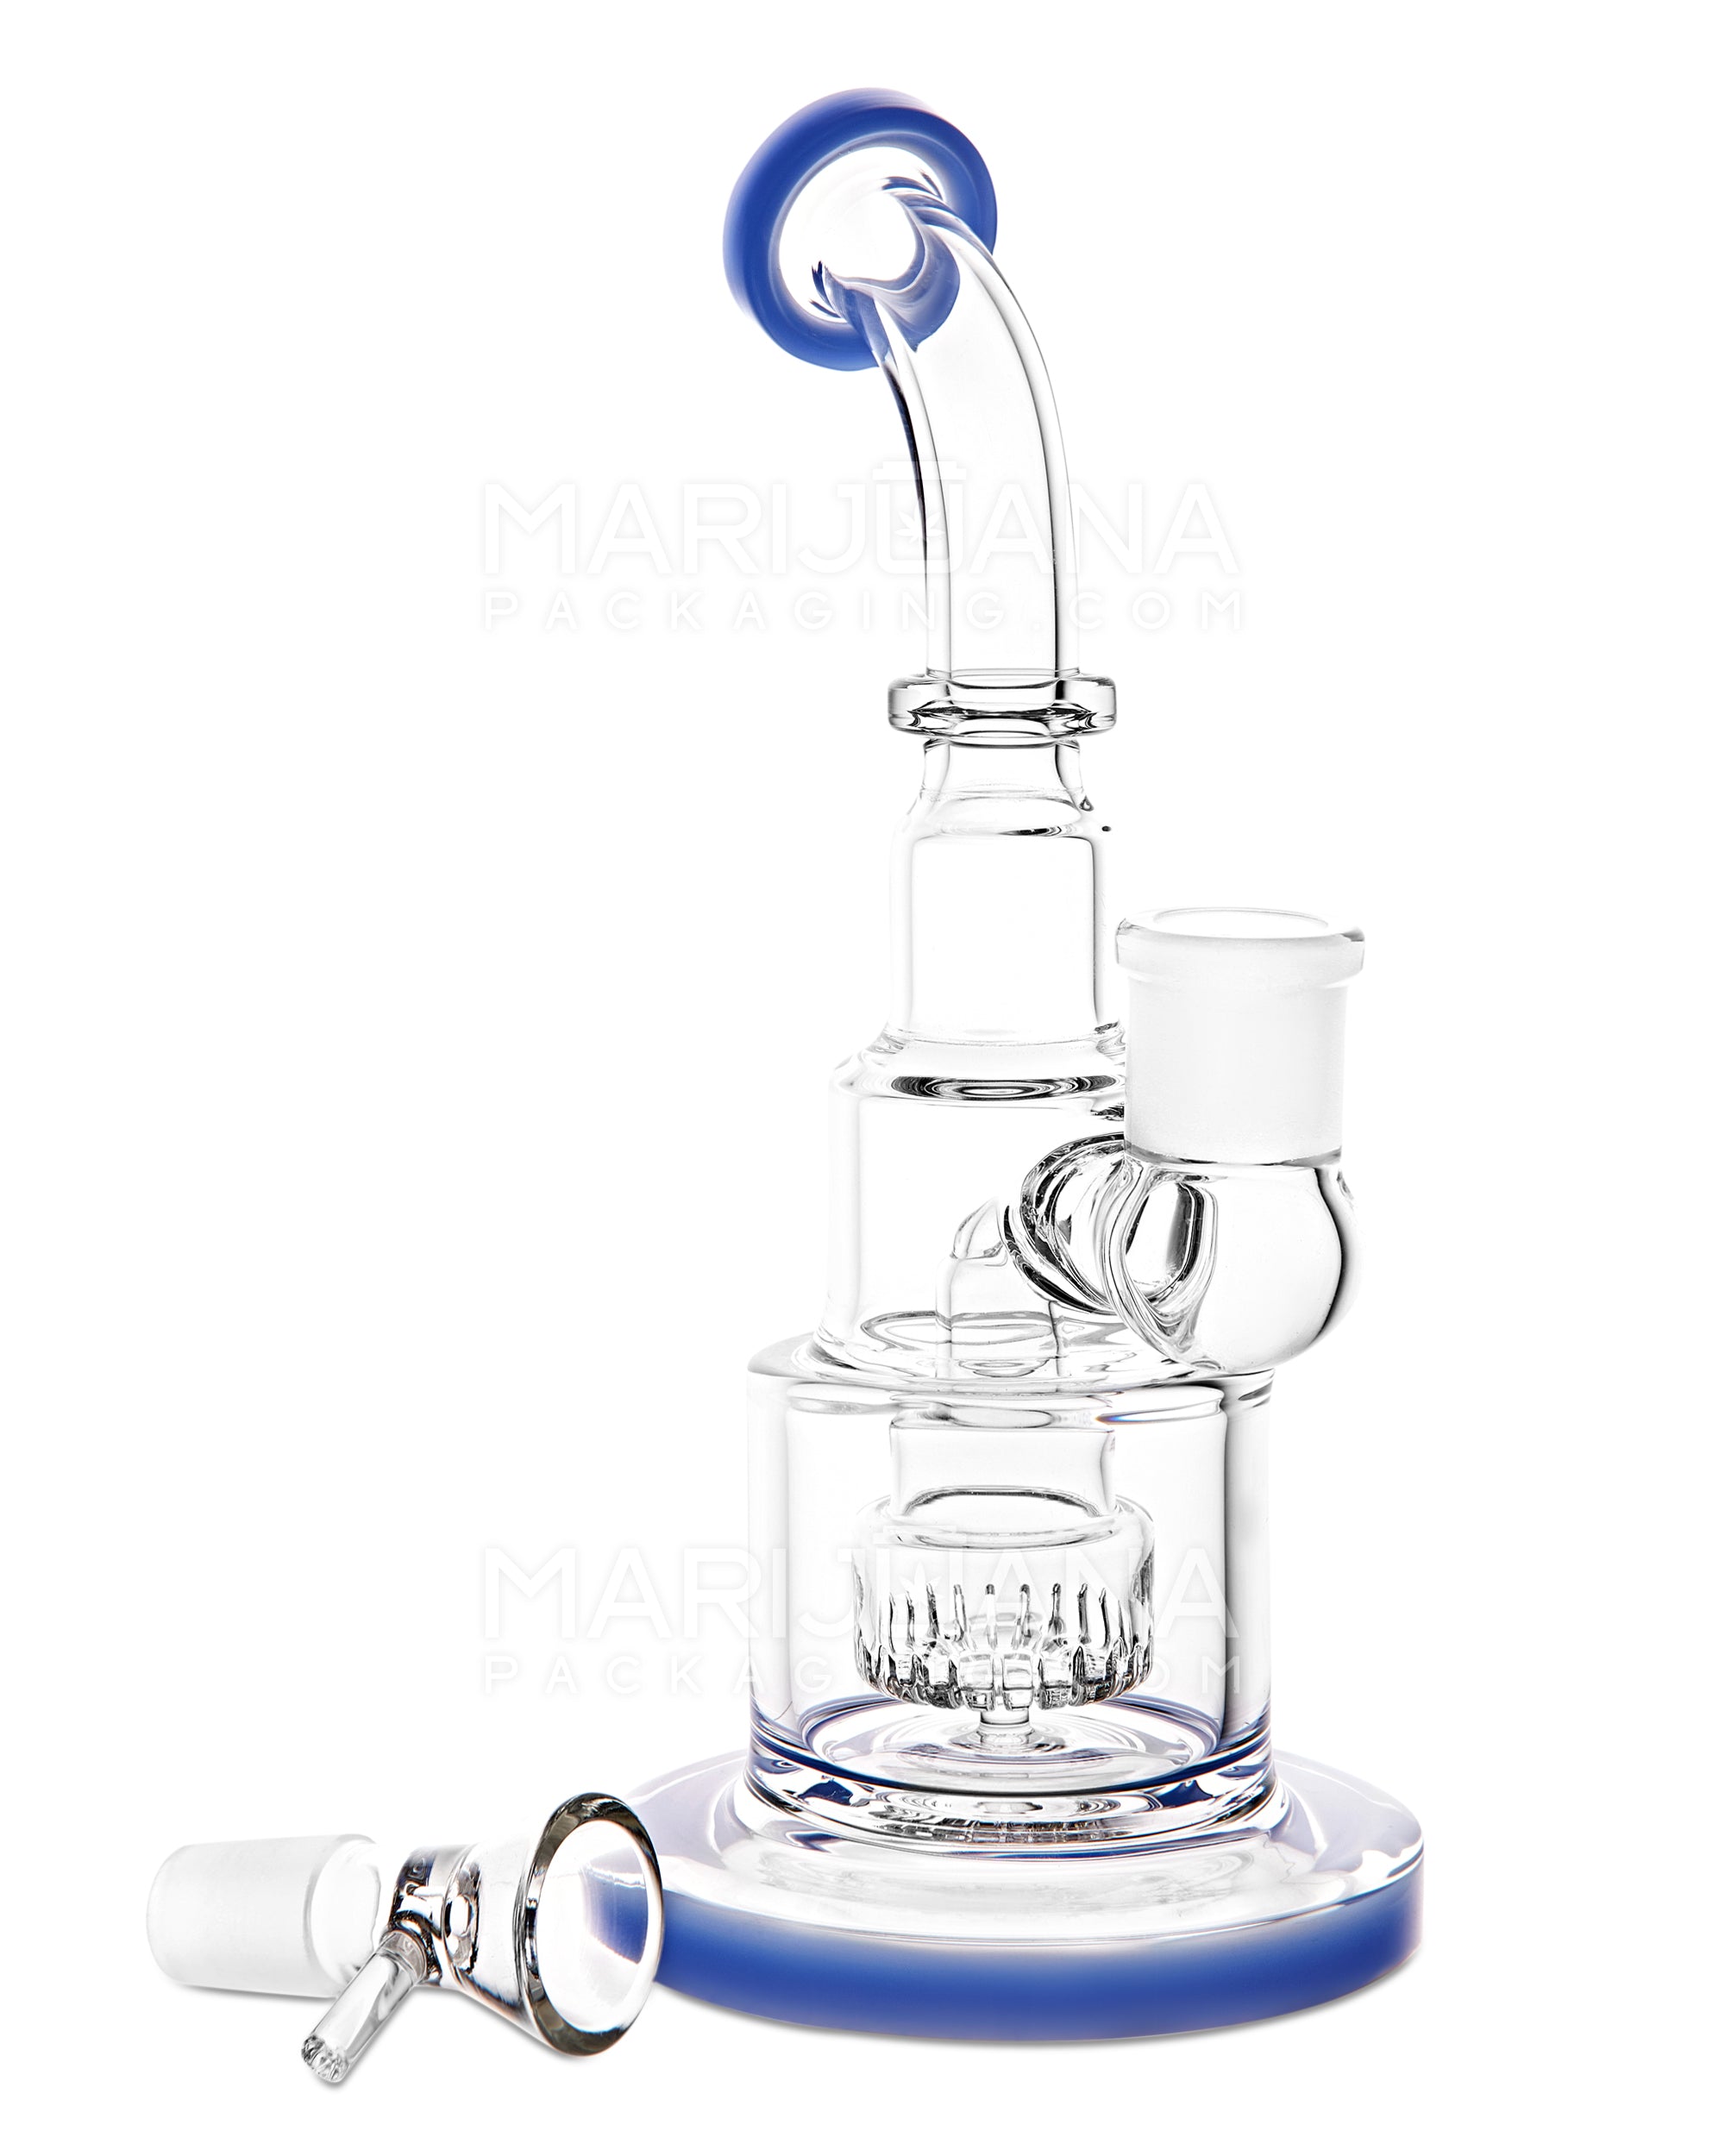 Bent Neck Showerhead Perc Glass Water Pipe w/ Thick Base | 9in Tall - 18mm Bowl - Blue - 2